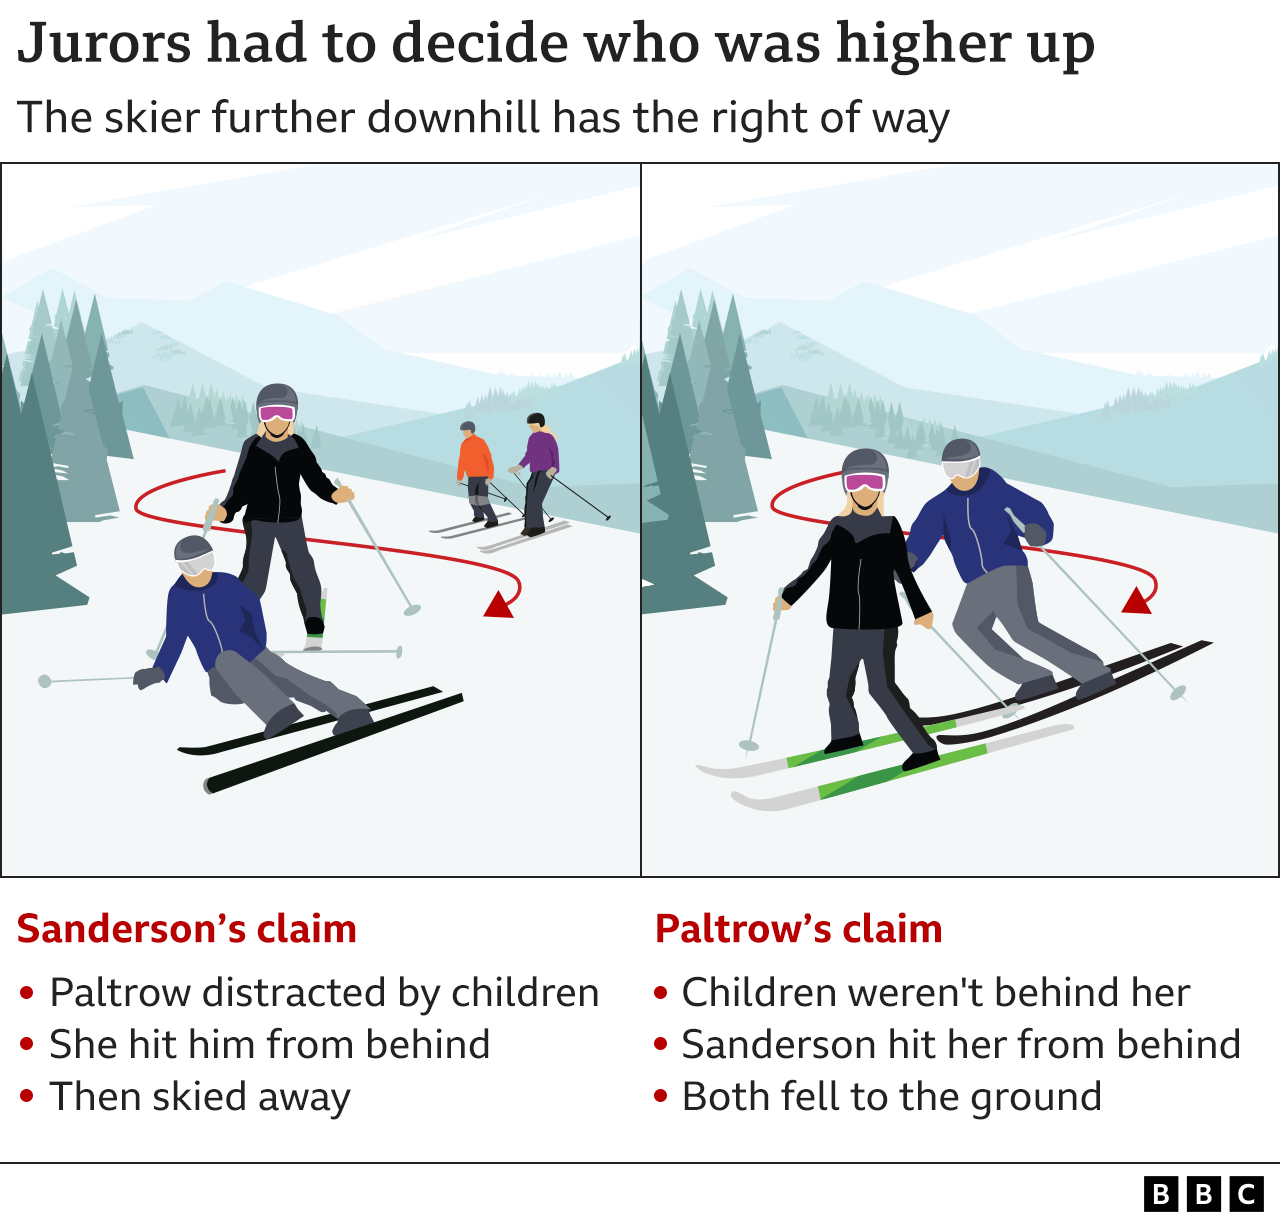 Graphic showing the two versions of what happened: jurors must decide who was higher up and therefore to blame for the collision but both Sanderson and Paltrow claim to have been further downhill